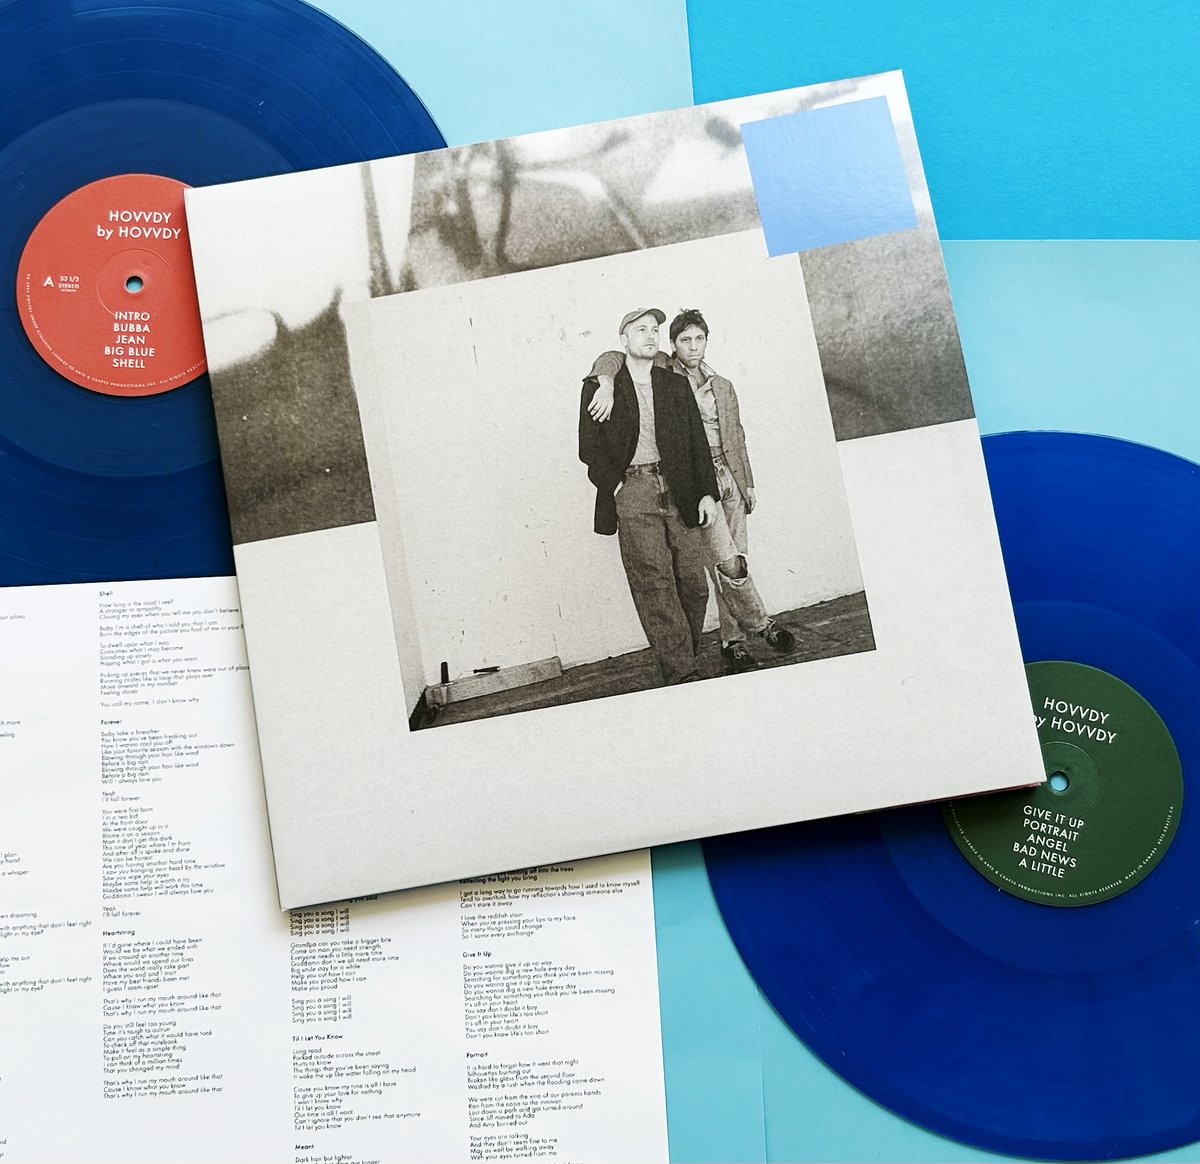 Grab the limited gatefold deluxe edition of @hovvdy's new self-titled double album in translucent midnight blue: Hovvdy.lnk.to/HovvdyTP/artis…